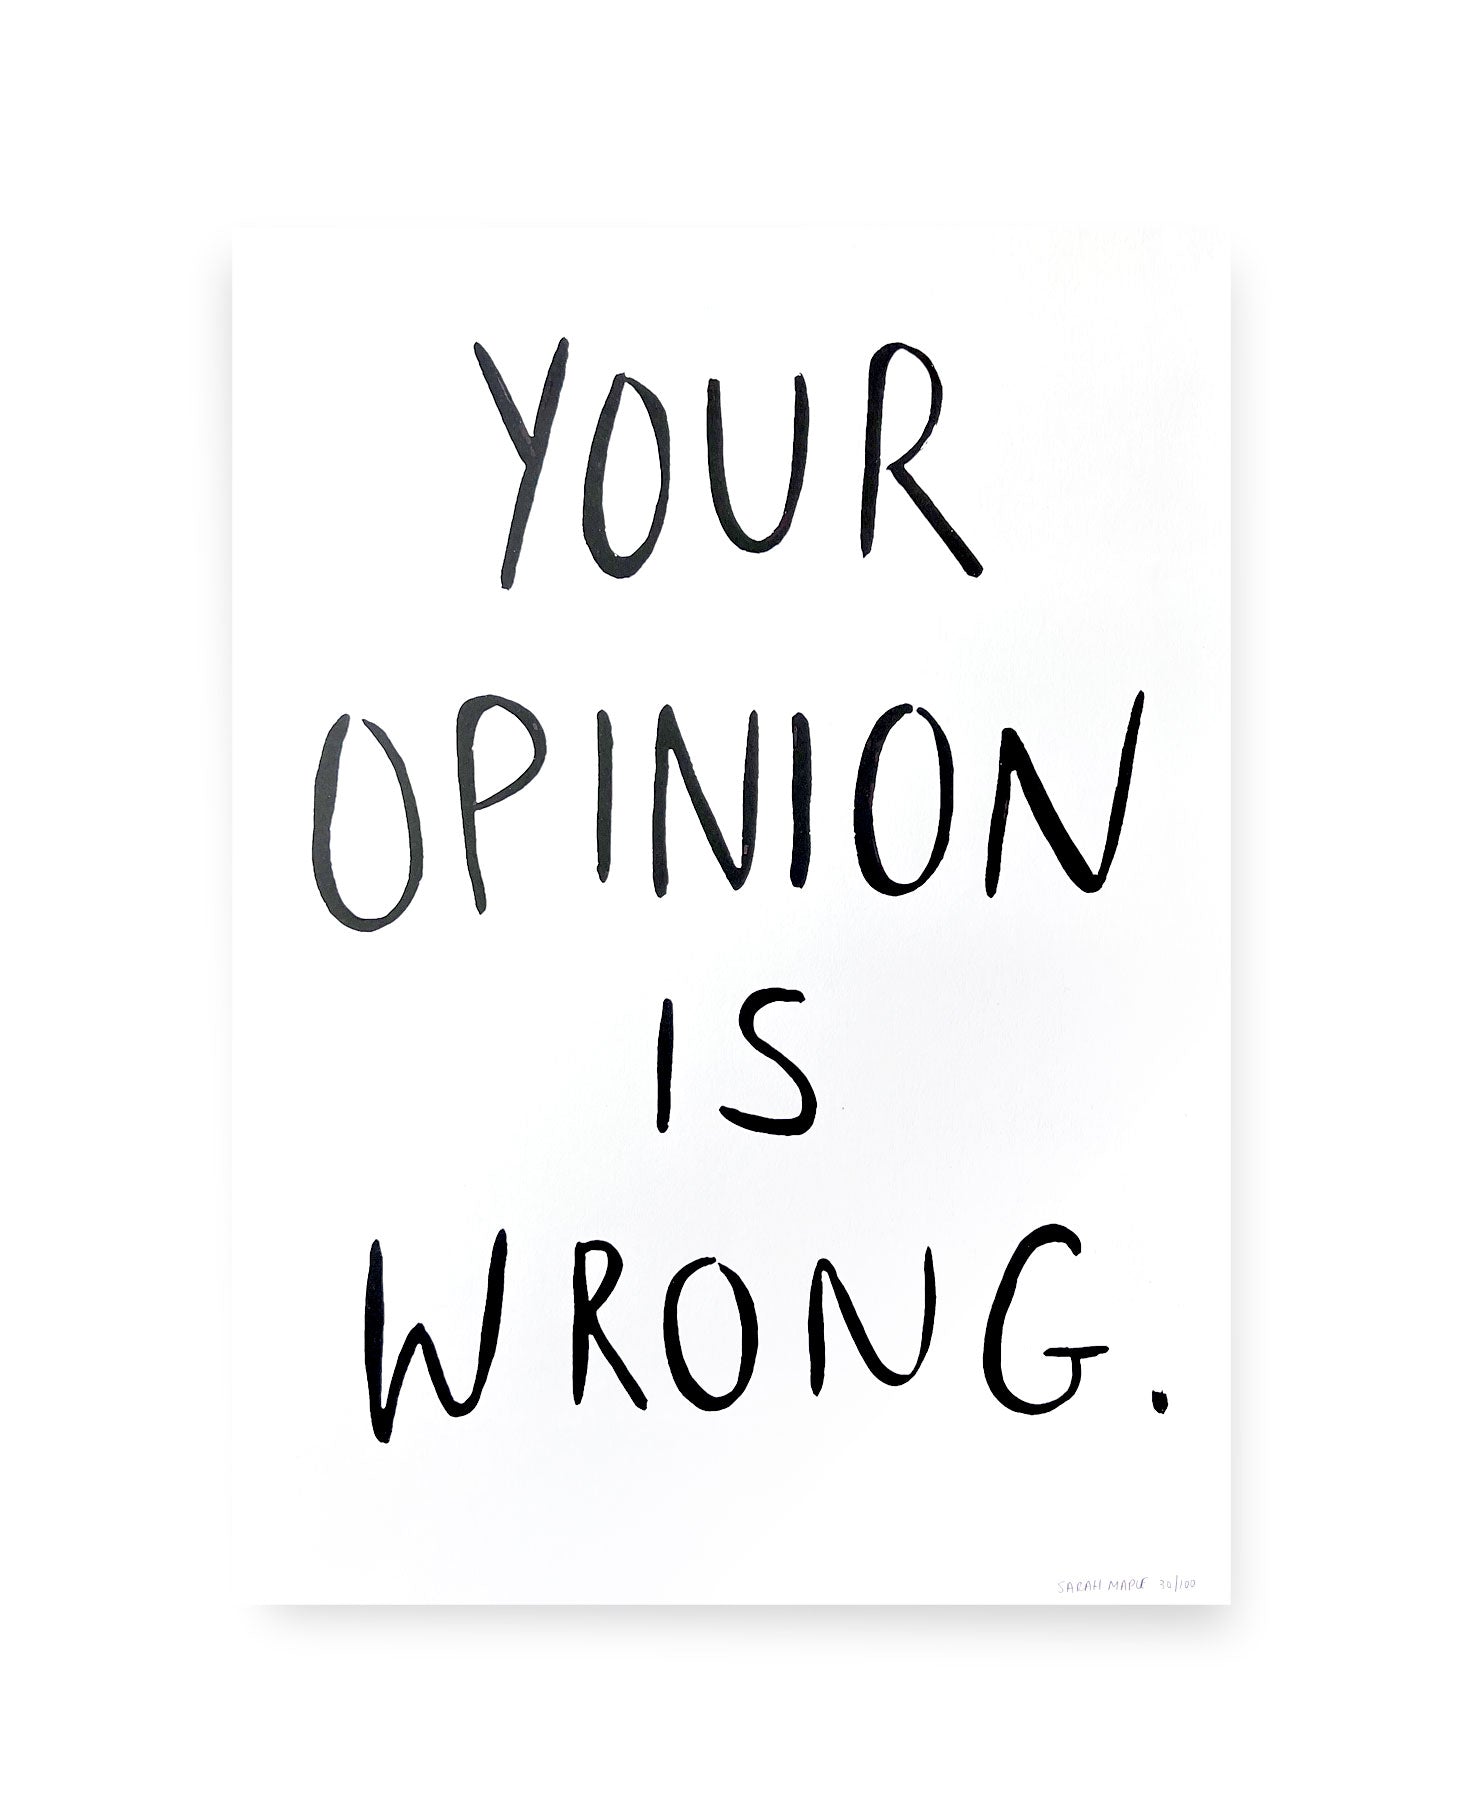 Your Opinion is Wrong by Sarah Maple available from Heath Kane Gallery